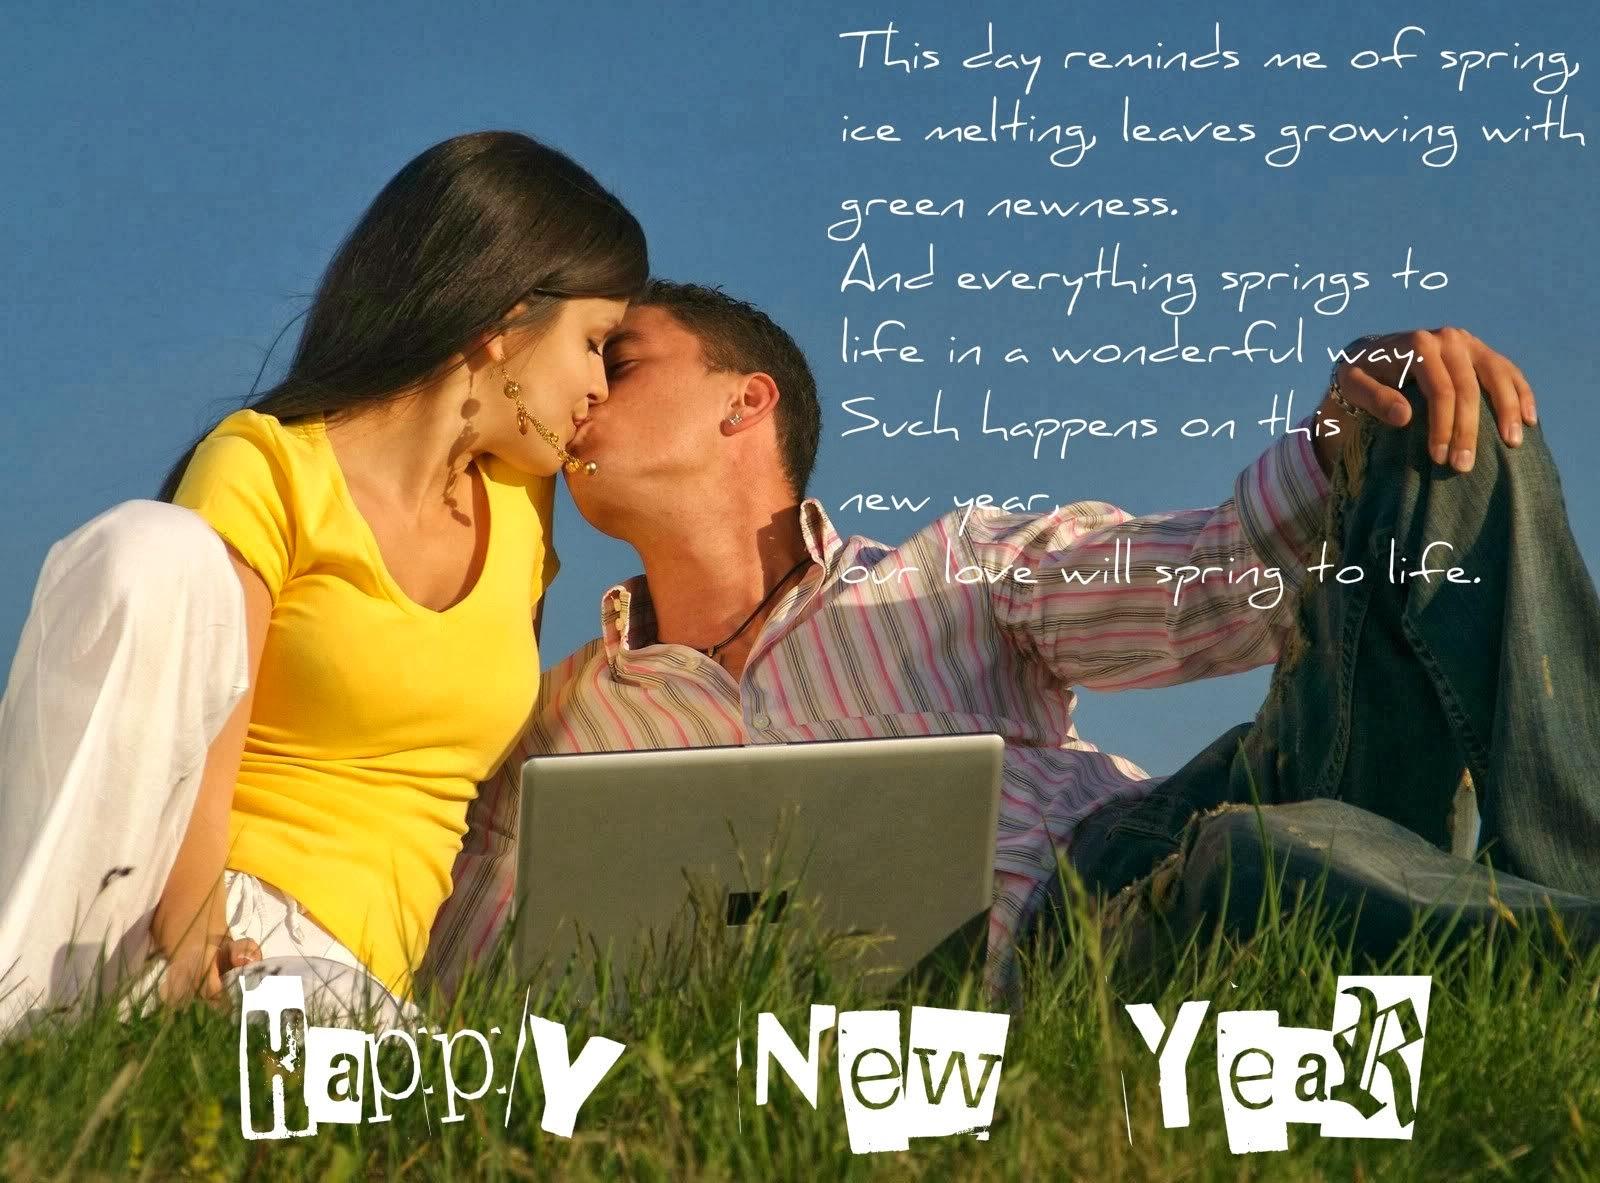 new year wishes love